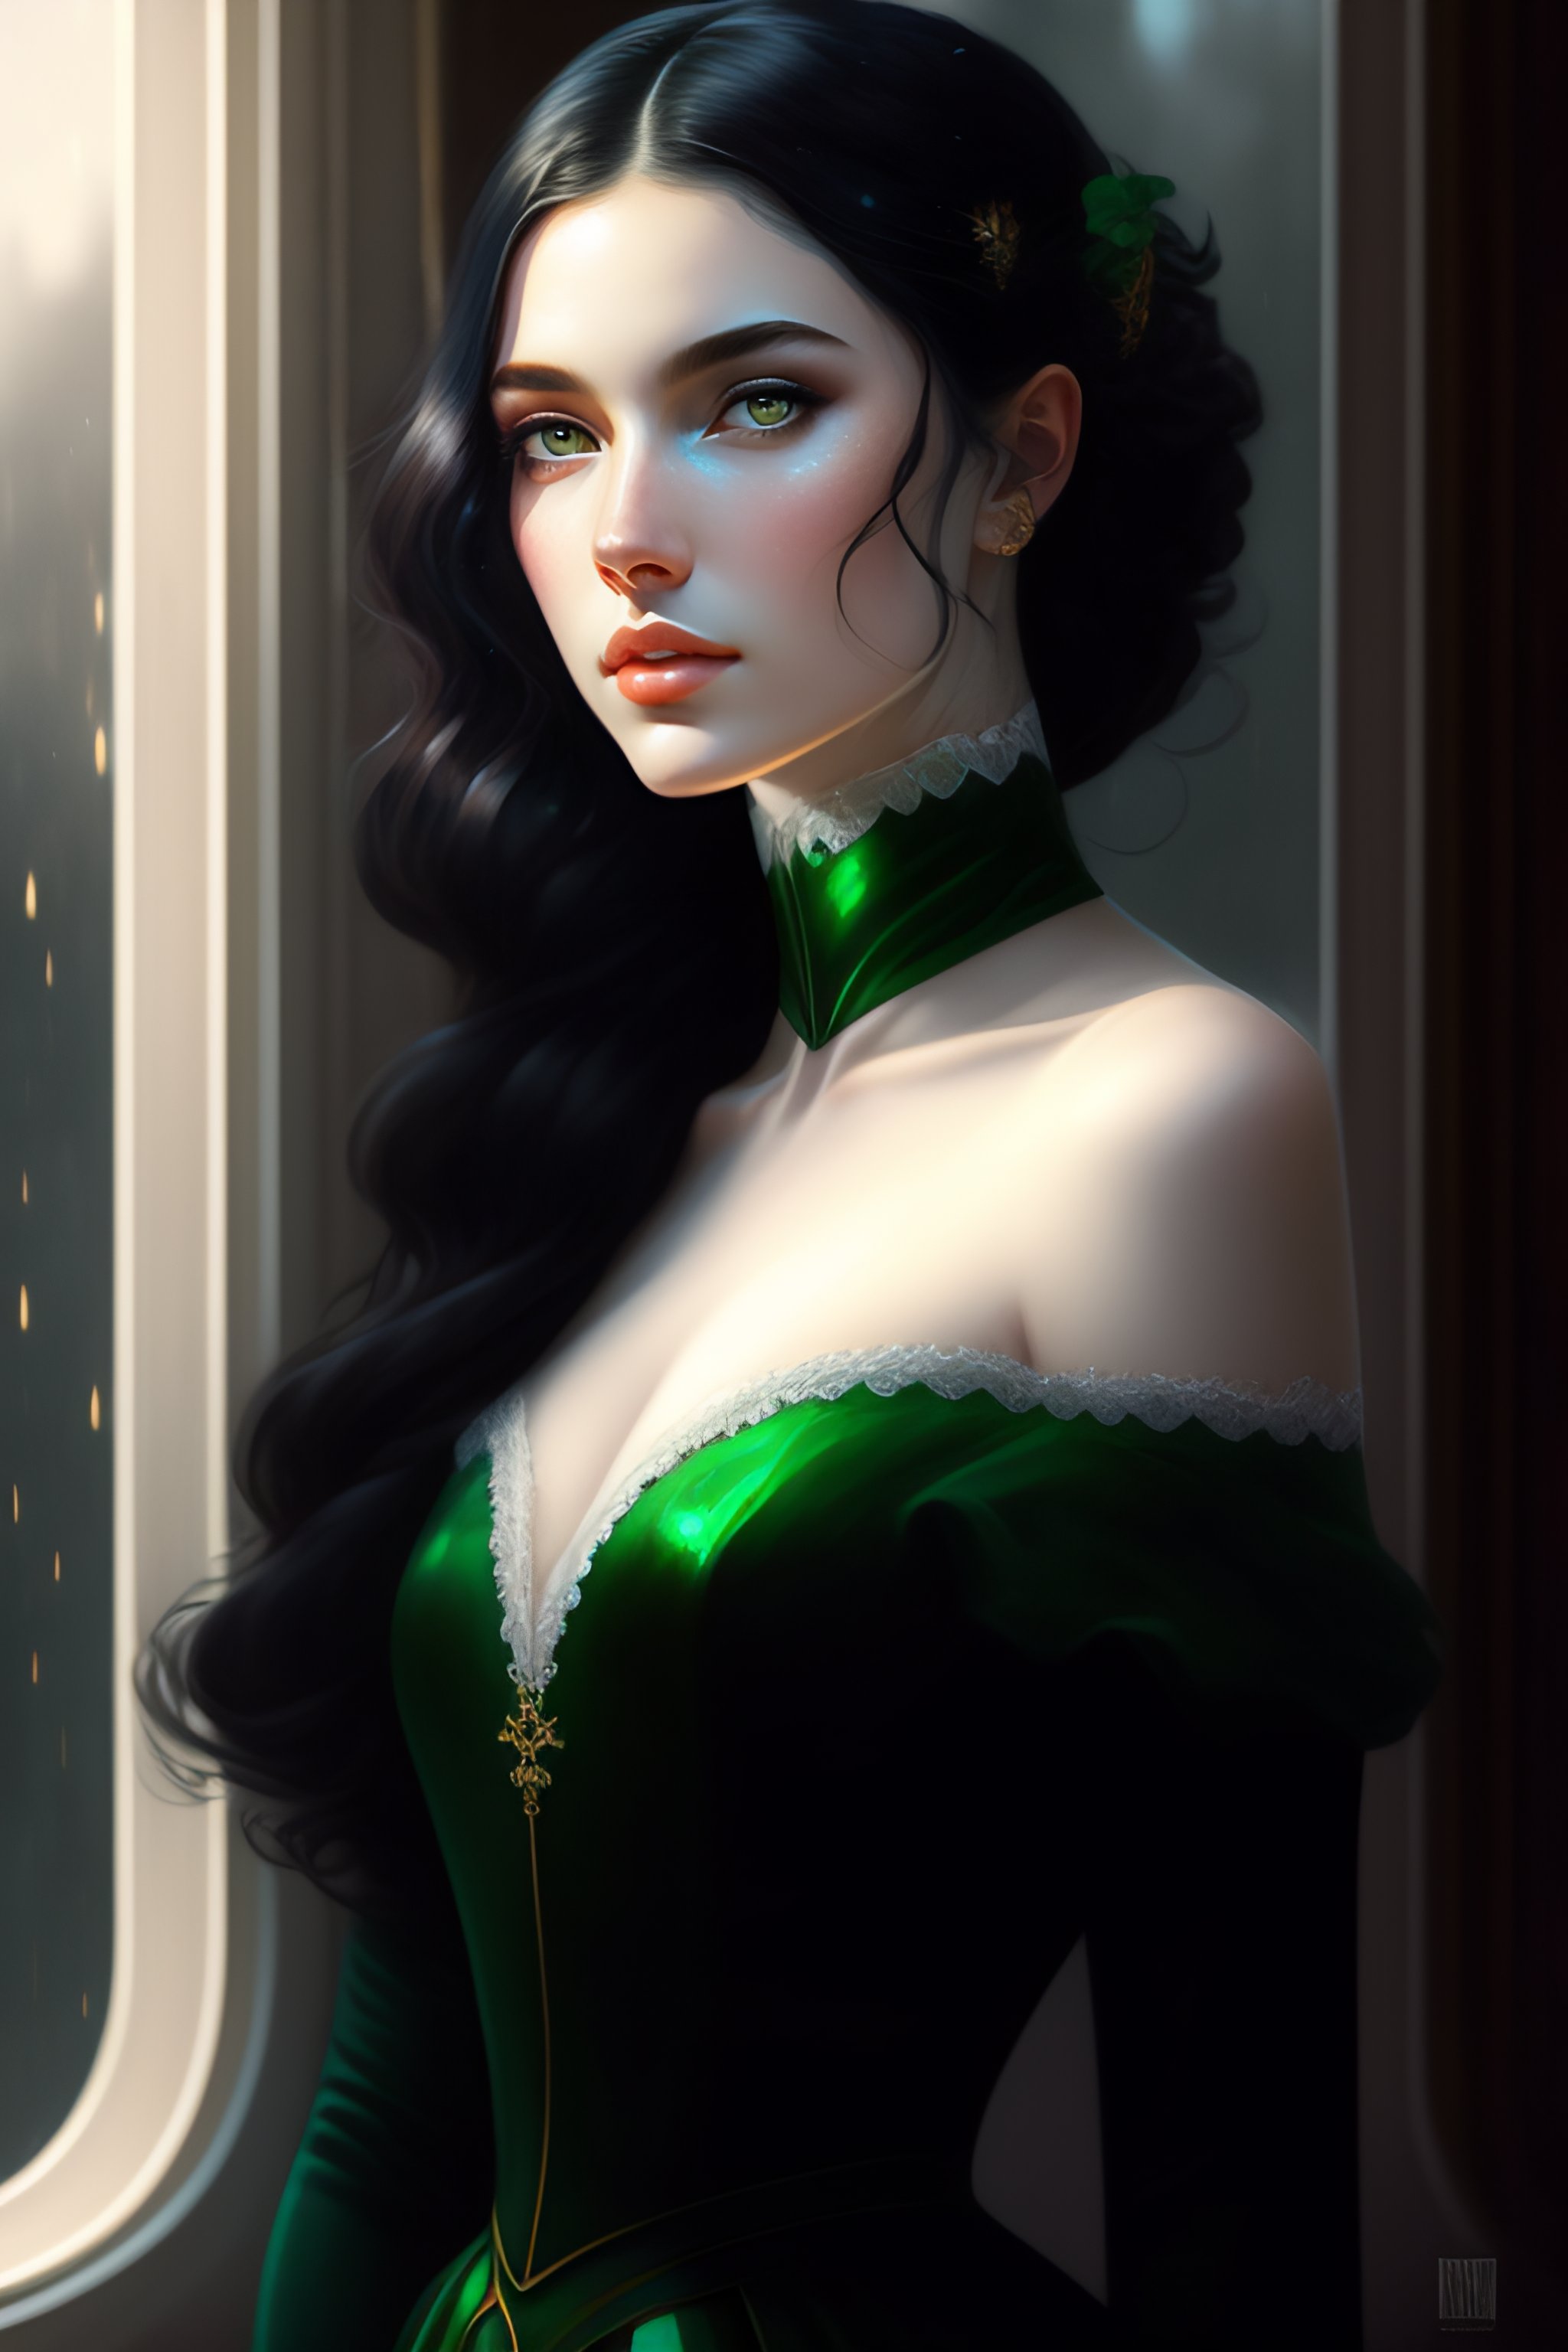 Lexica Black Hair Young Woman Pale Skin White Skin Green Eyes Looking Through The Window 1893